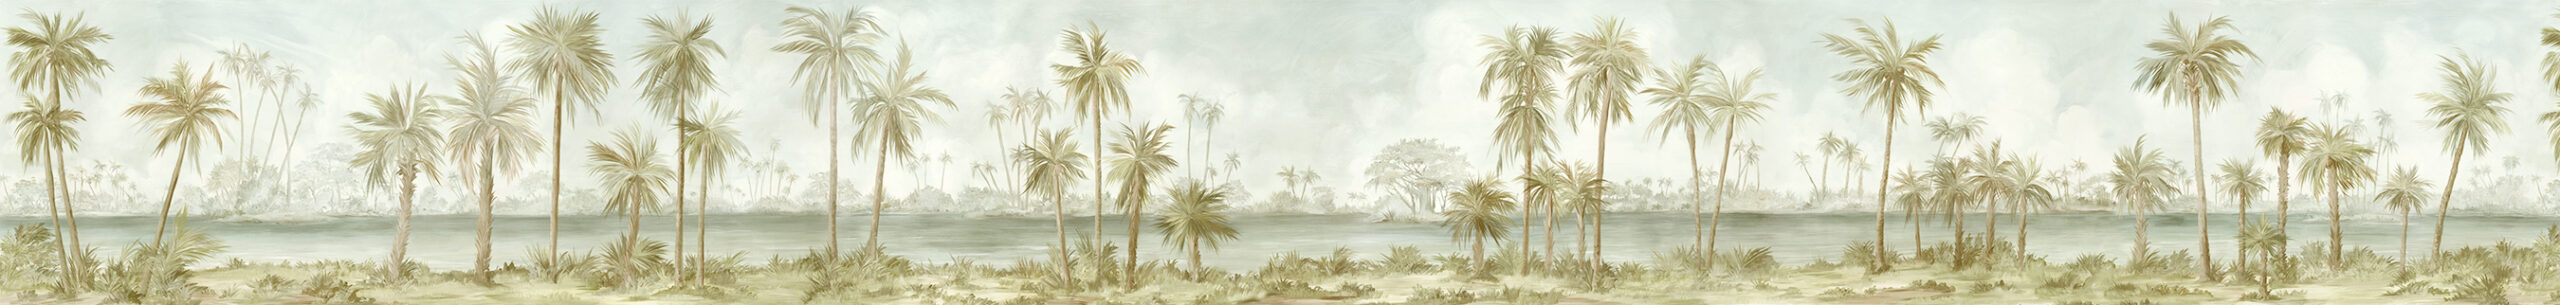 Hand painted tropical scenic mural wallpaper of Palm Beach with palm trees and water in warm tones